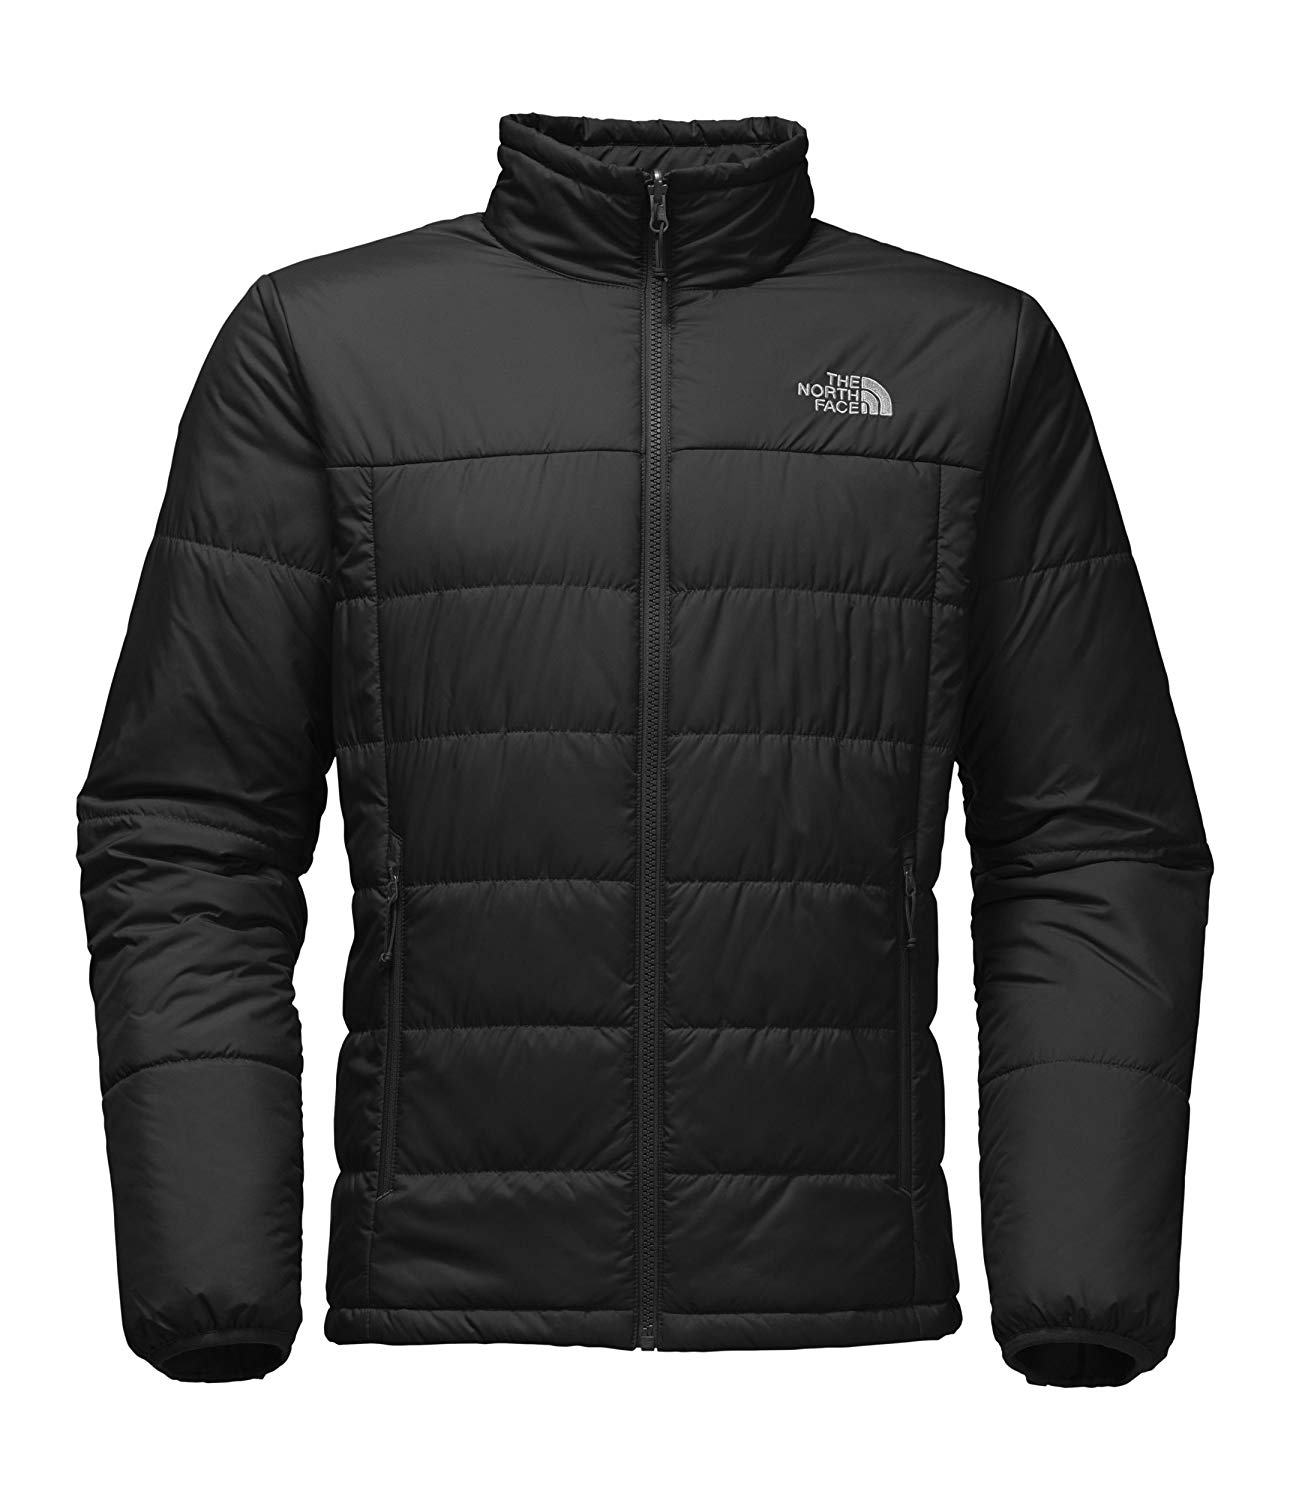 The North Face Men’s Carto Triclimate Jacket The North Face ktmart.vn 2